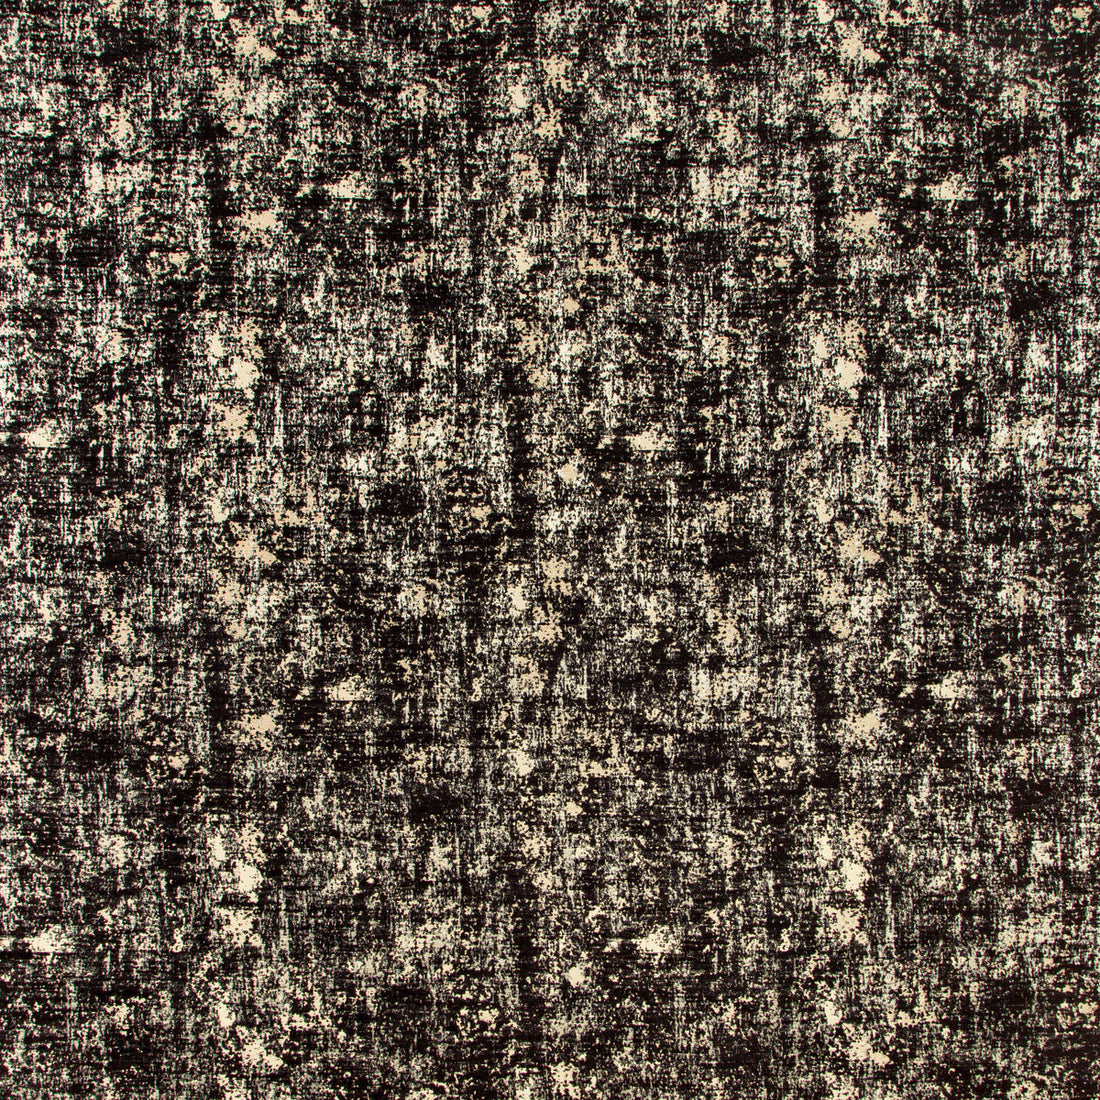 Les Ecorces Woven fabric in noir color - pattern 8017130.8.0 - by Brunschwig &amp; Fils in the Les Ensembliers II collection